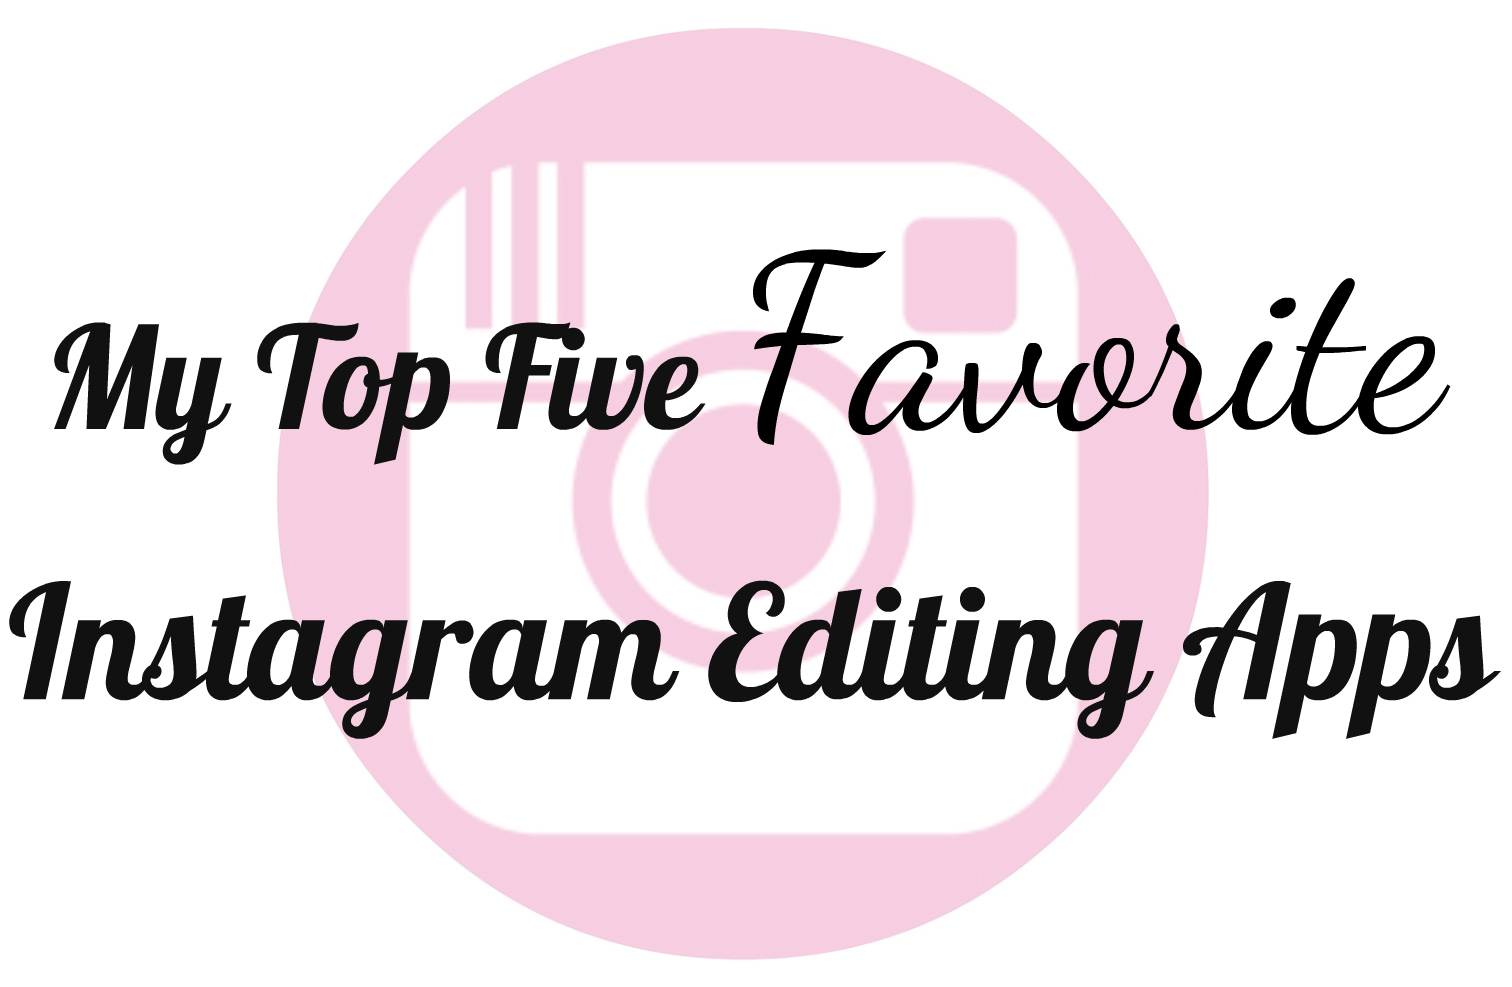 best instagram editing apps, how to edit instagram photos, best instagram filters, best ig filter apps, top editing apps for instagram, how to use filters for instagram, how to use vsco, lifestyle blogger photo editing, top influencer instagram filters, most popular instagram editing apps